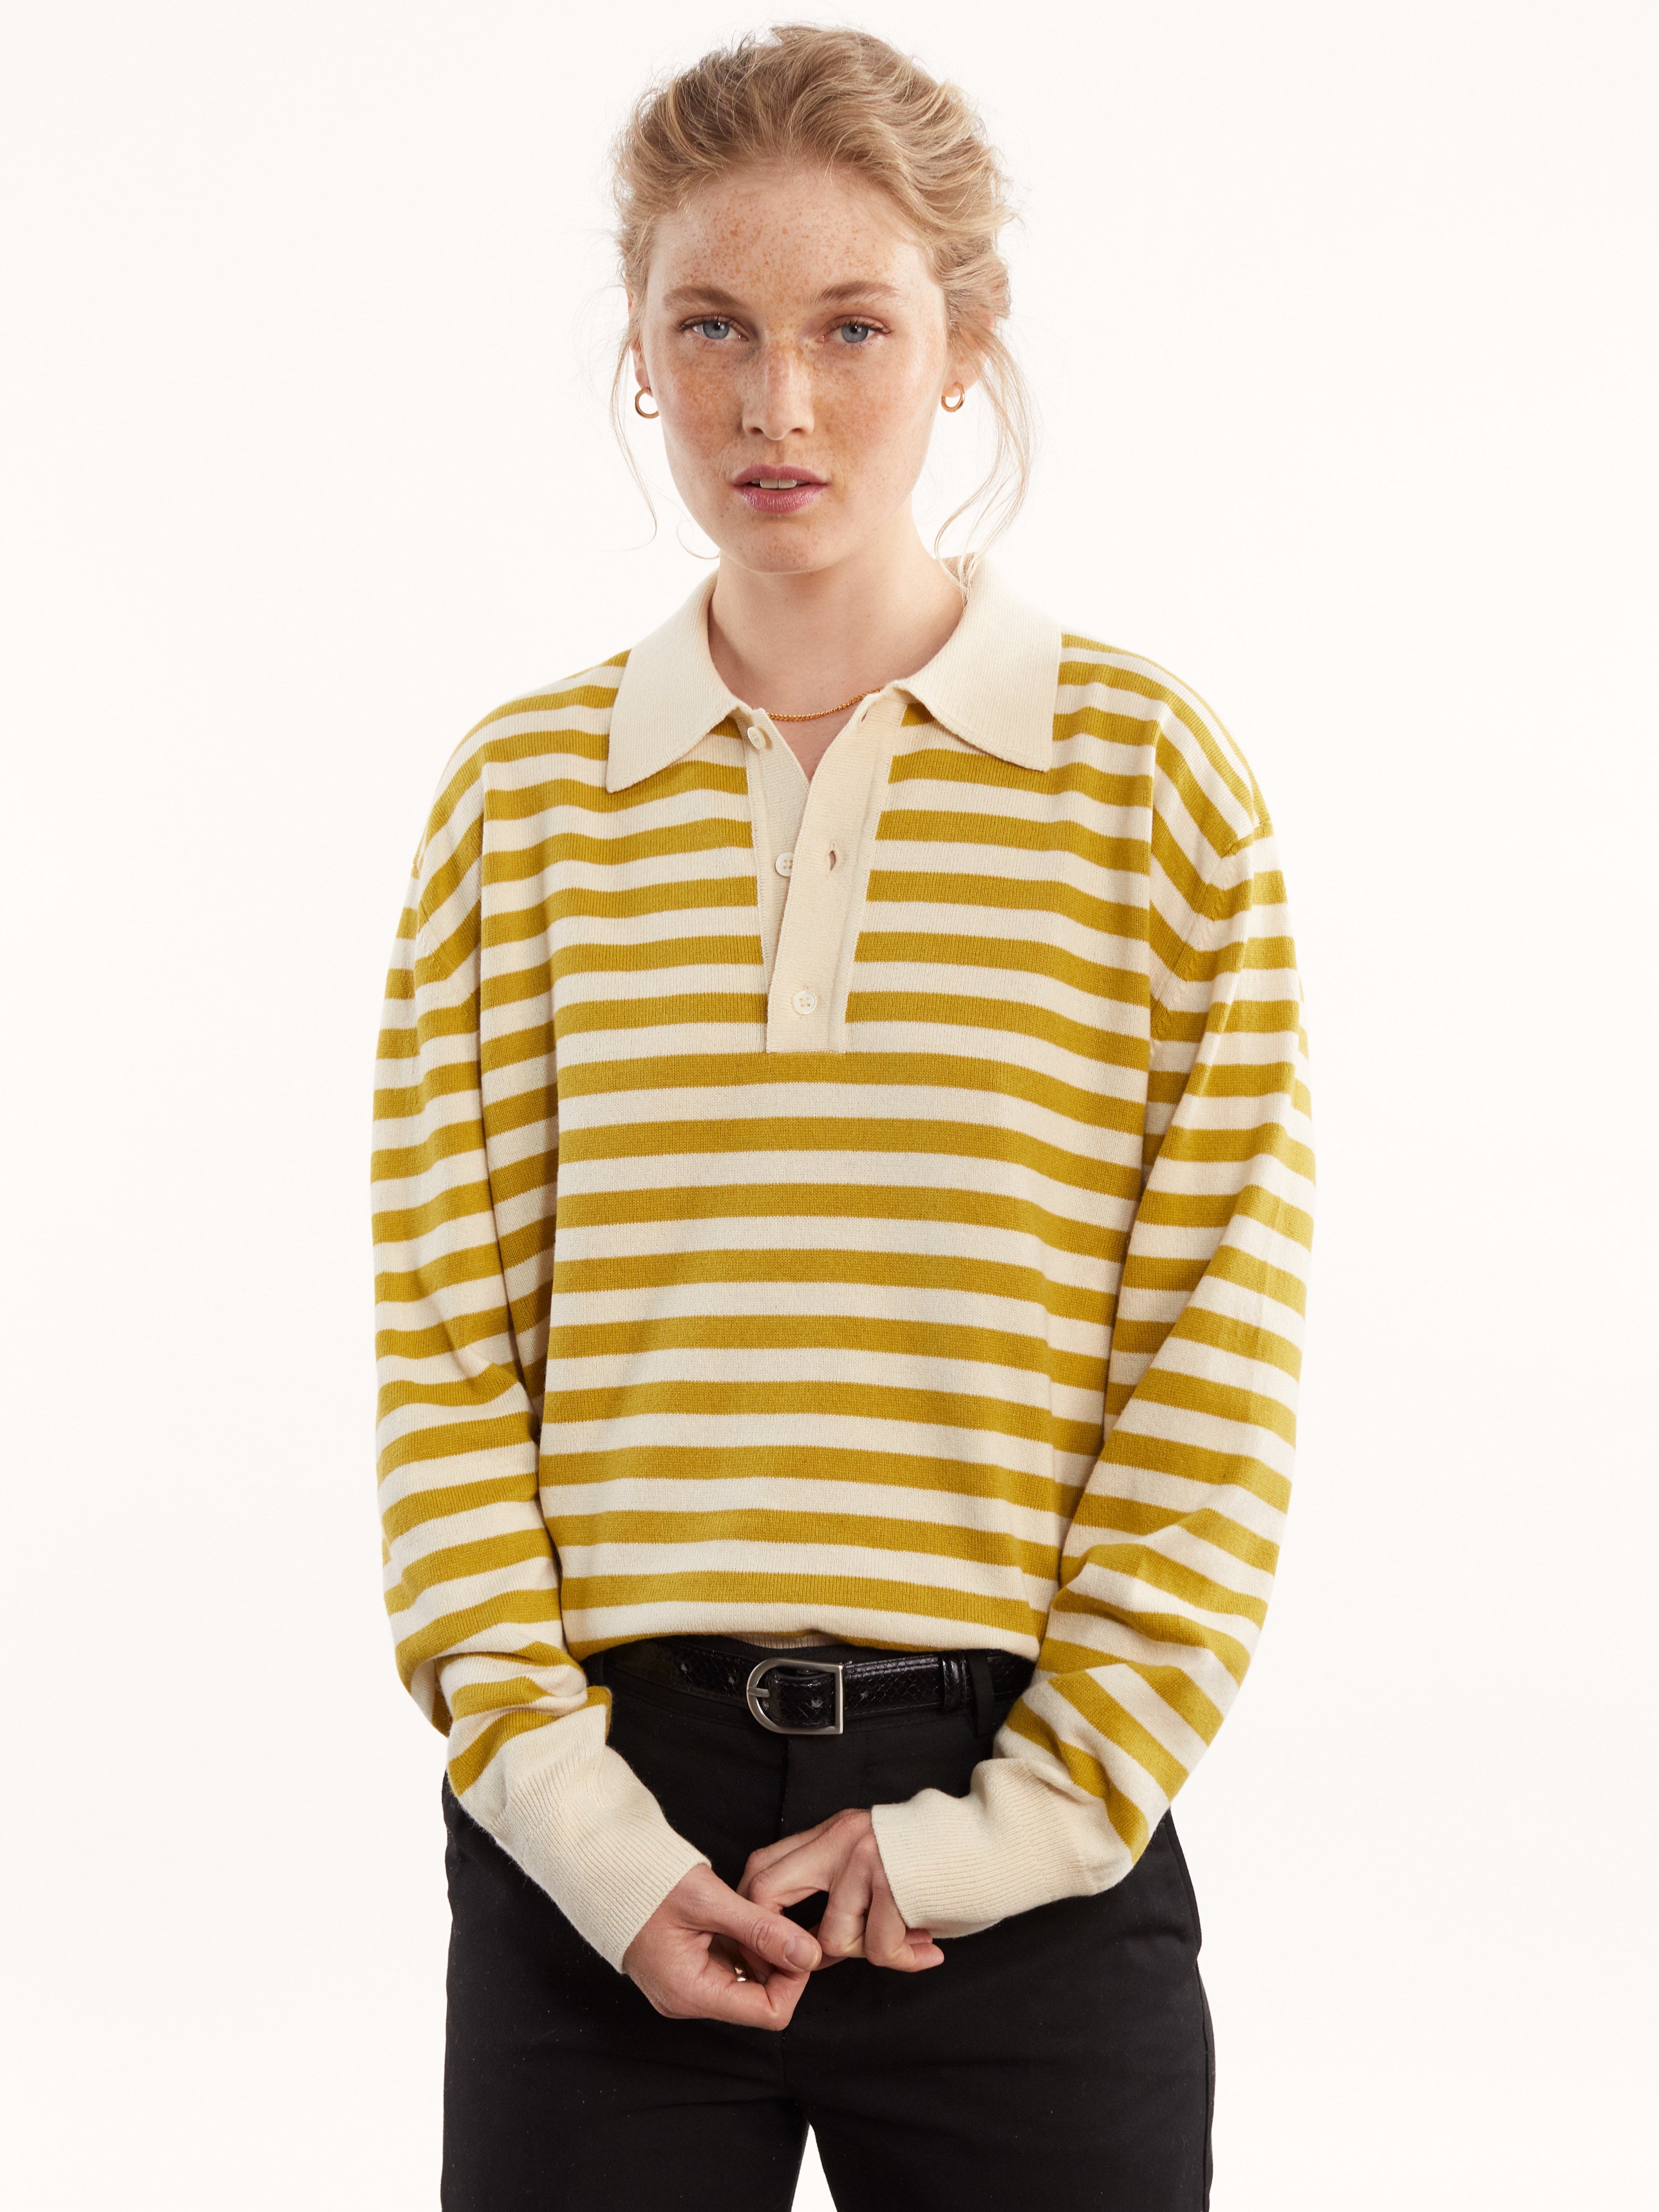 Women's yellow striped polo shirt made of recycled Cashmere and cotton